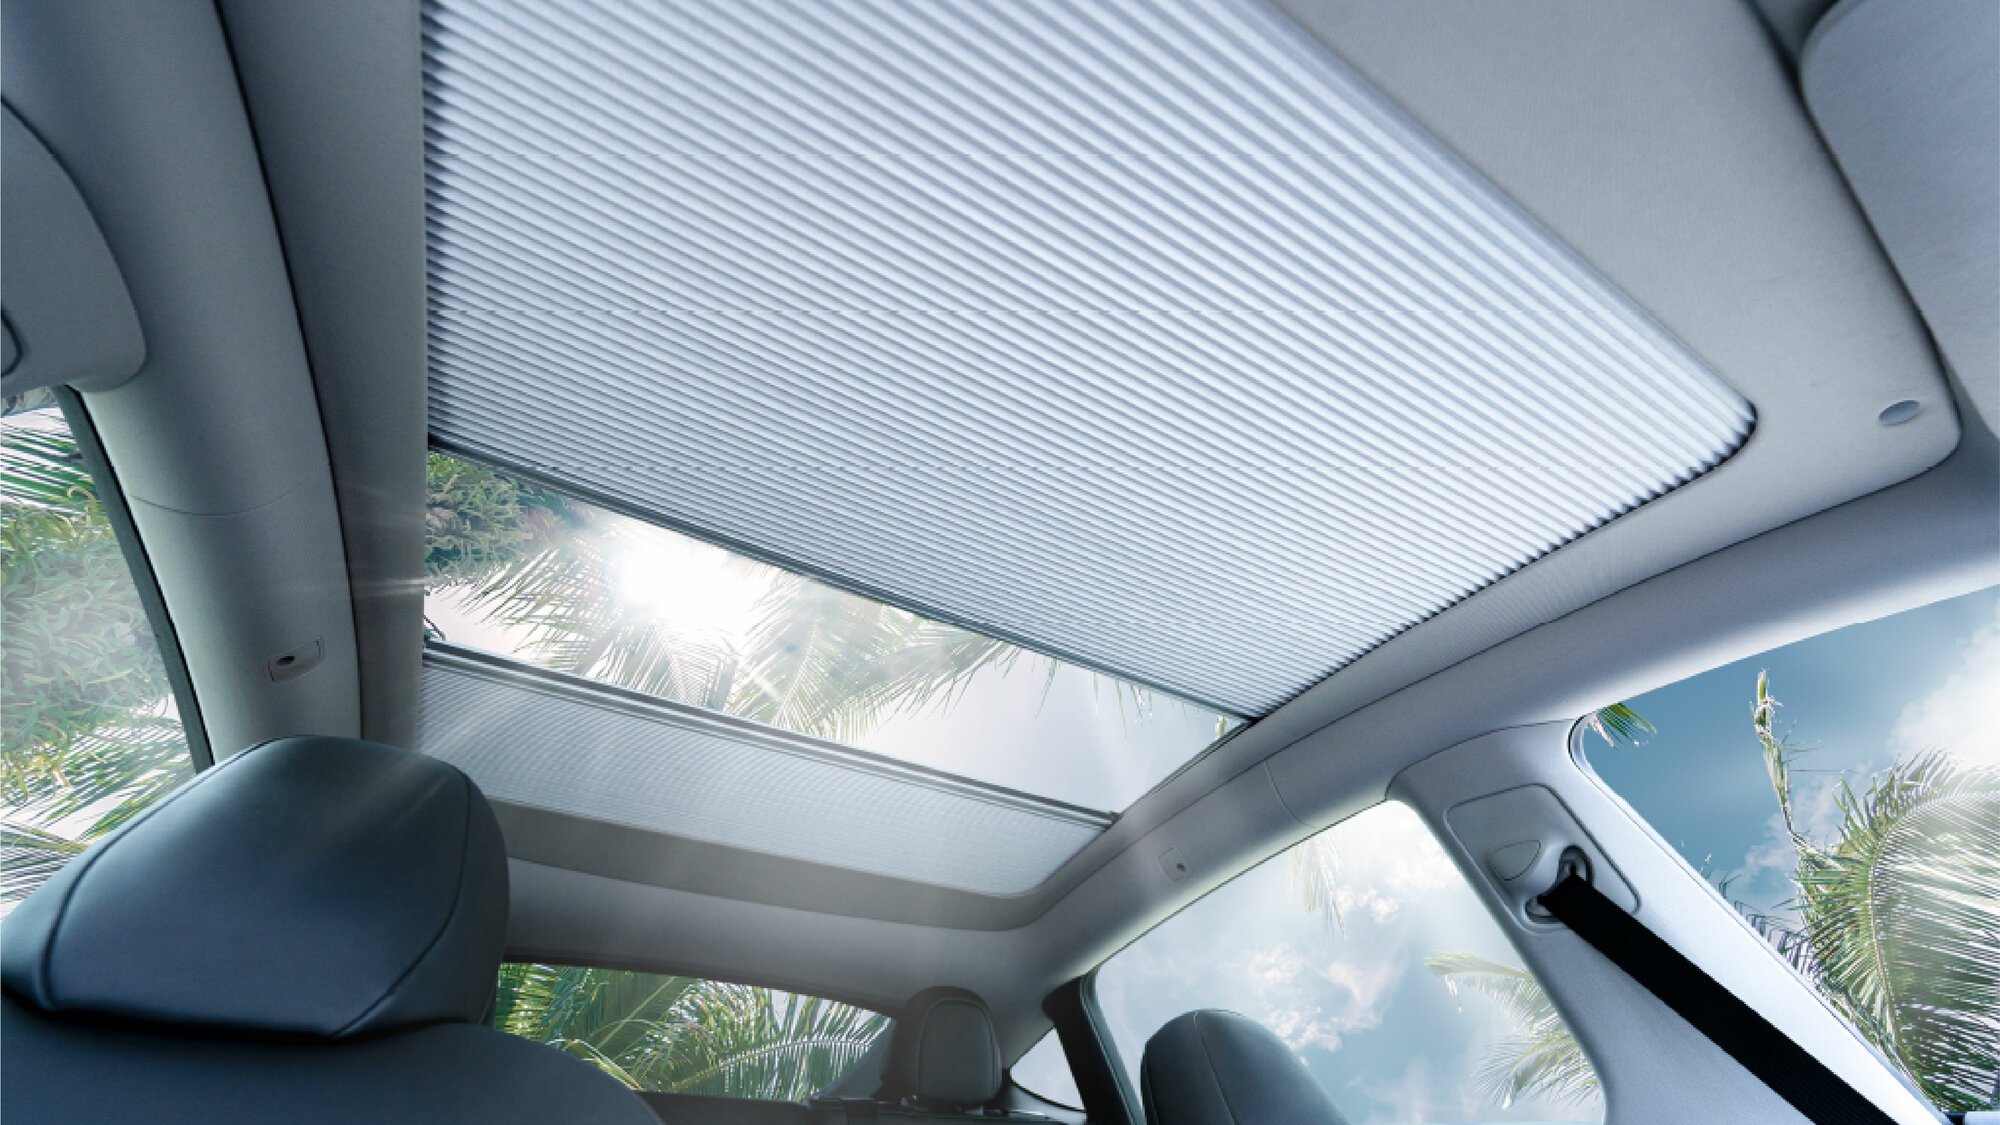 Vendor - FullShade - The First Retractable Roof Sunshade for Tesla